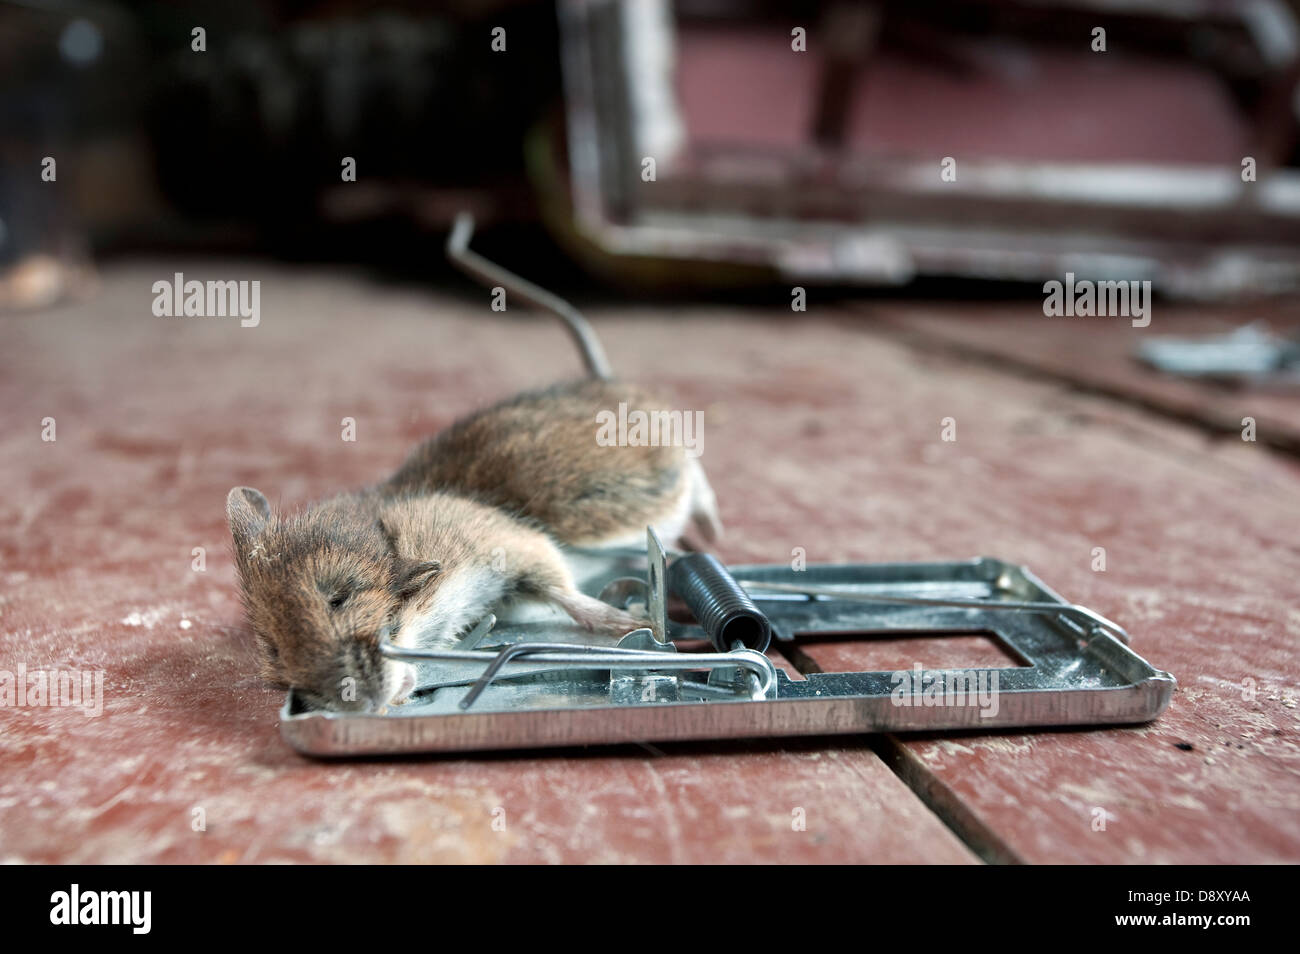 https://c8.alamy.com/comp/D8XYAA/mouse-caught-in-a-trap-D8XYAA.jpg